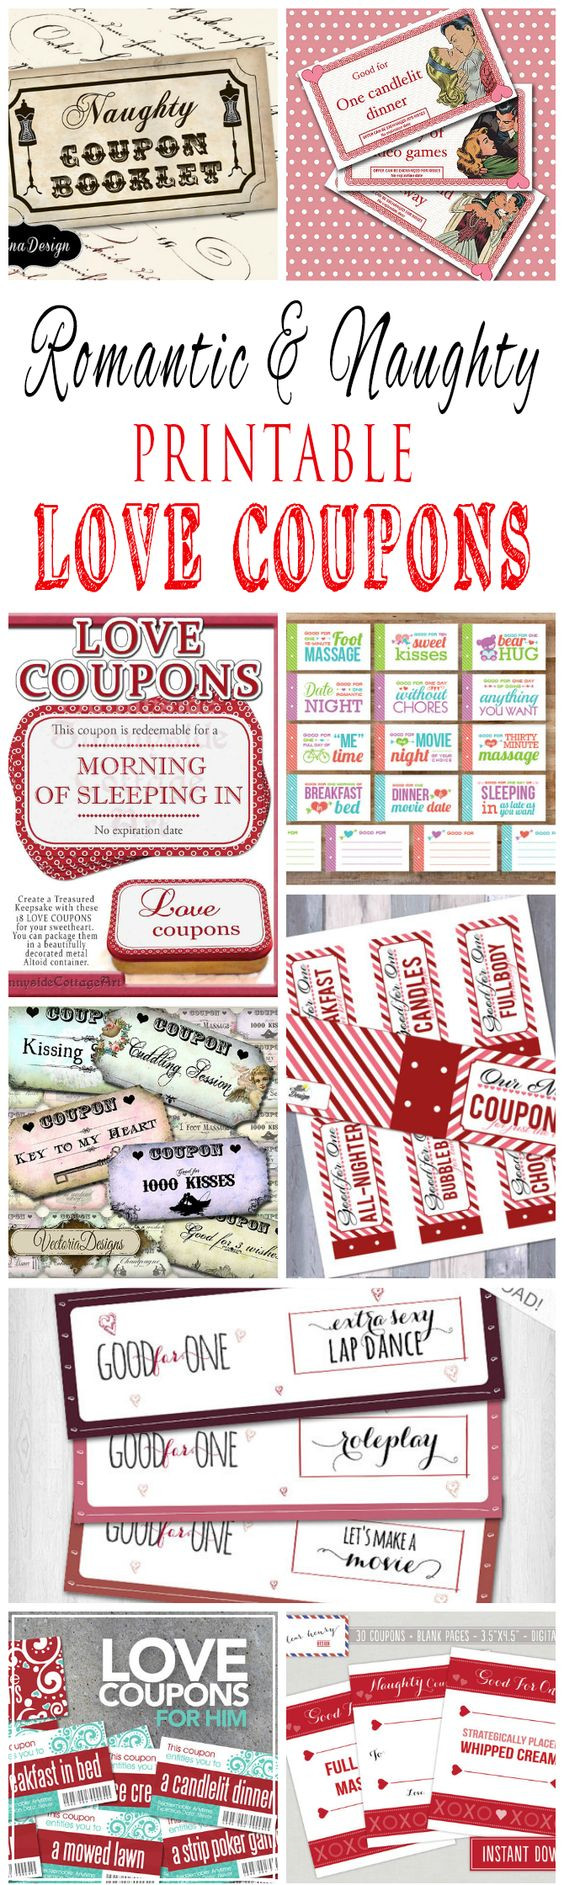 Naughty Gift Ideas For Boyfriend
 Romantic And Naughty Printable Love Coupons For Him